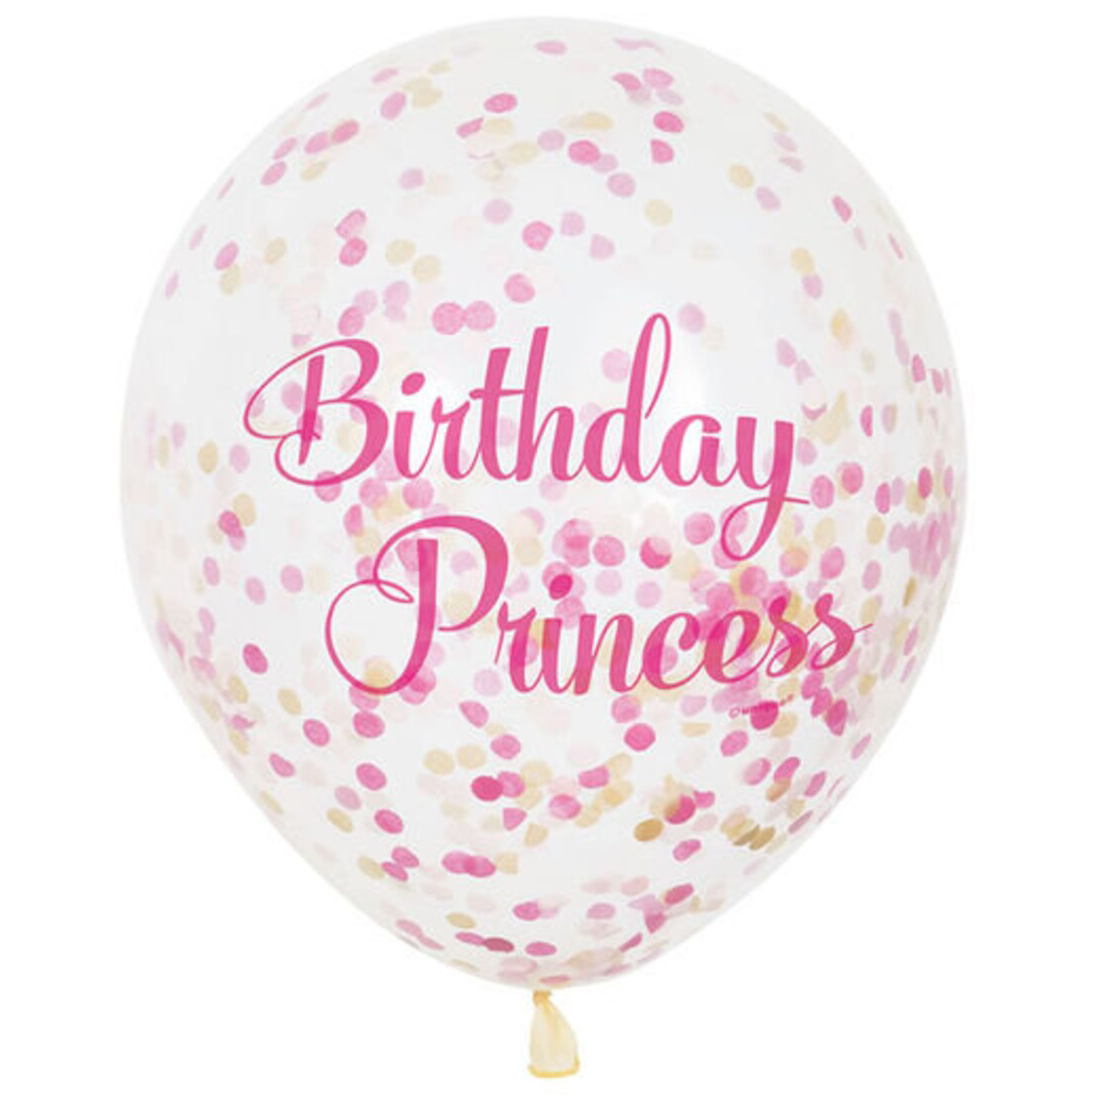 Birthday Princess Clear Balloons Prefilled with Pink and Gold Confetti Pack of 6